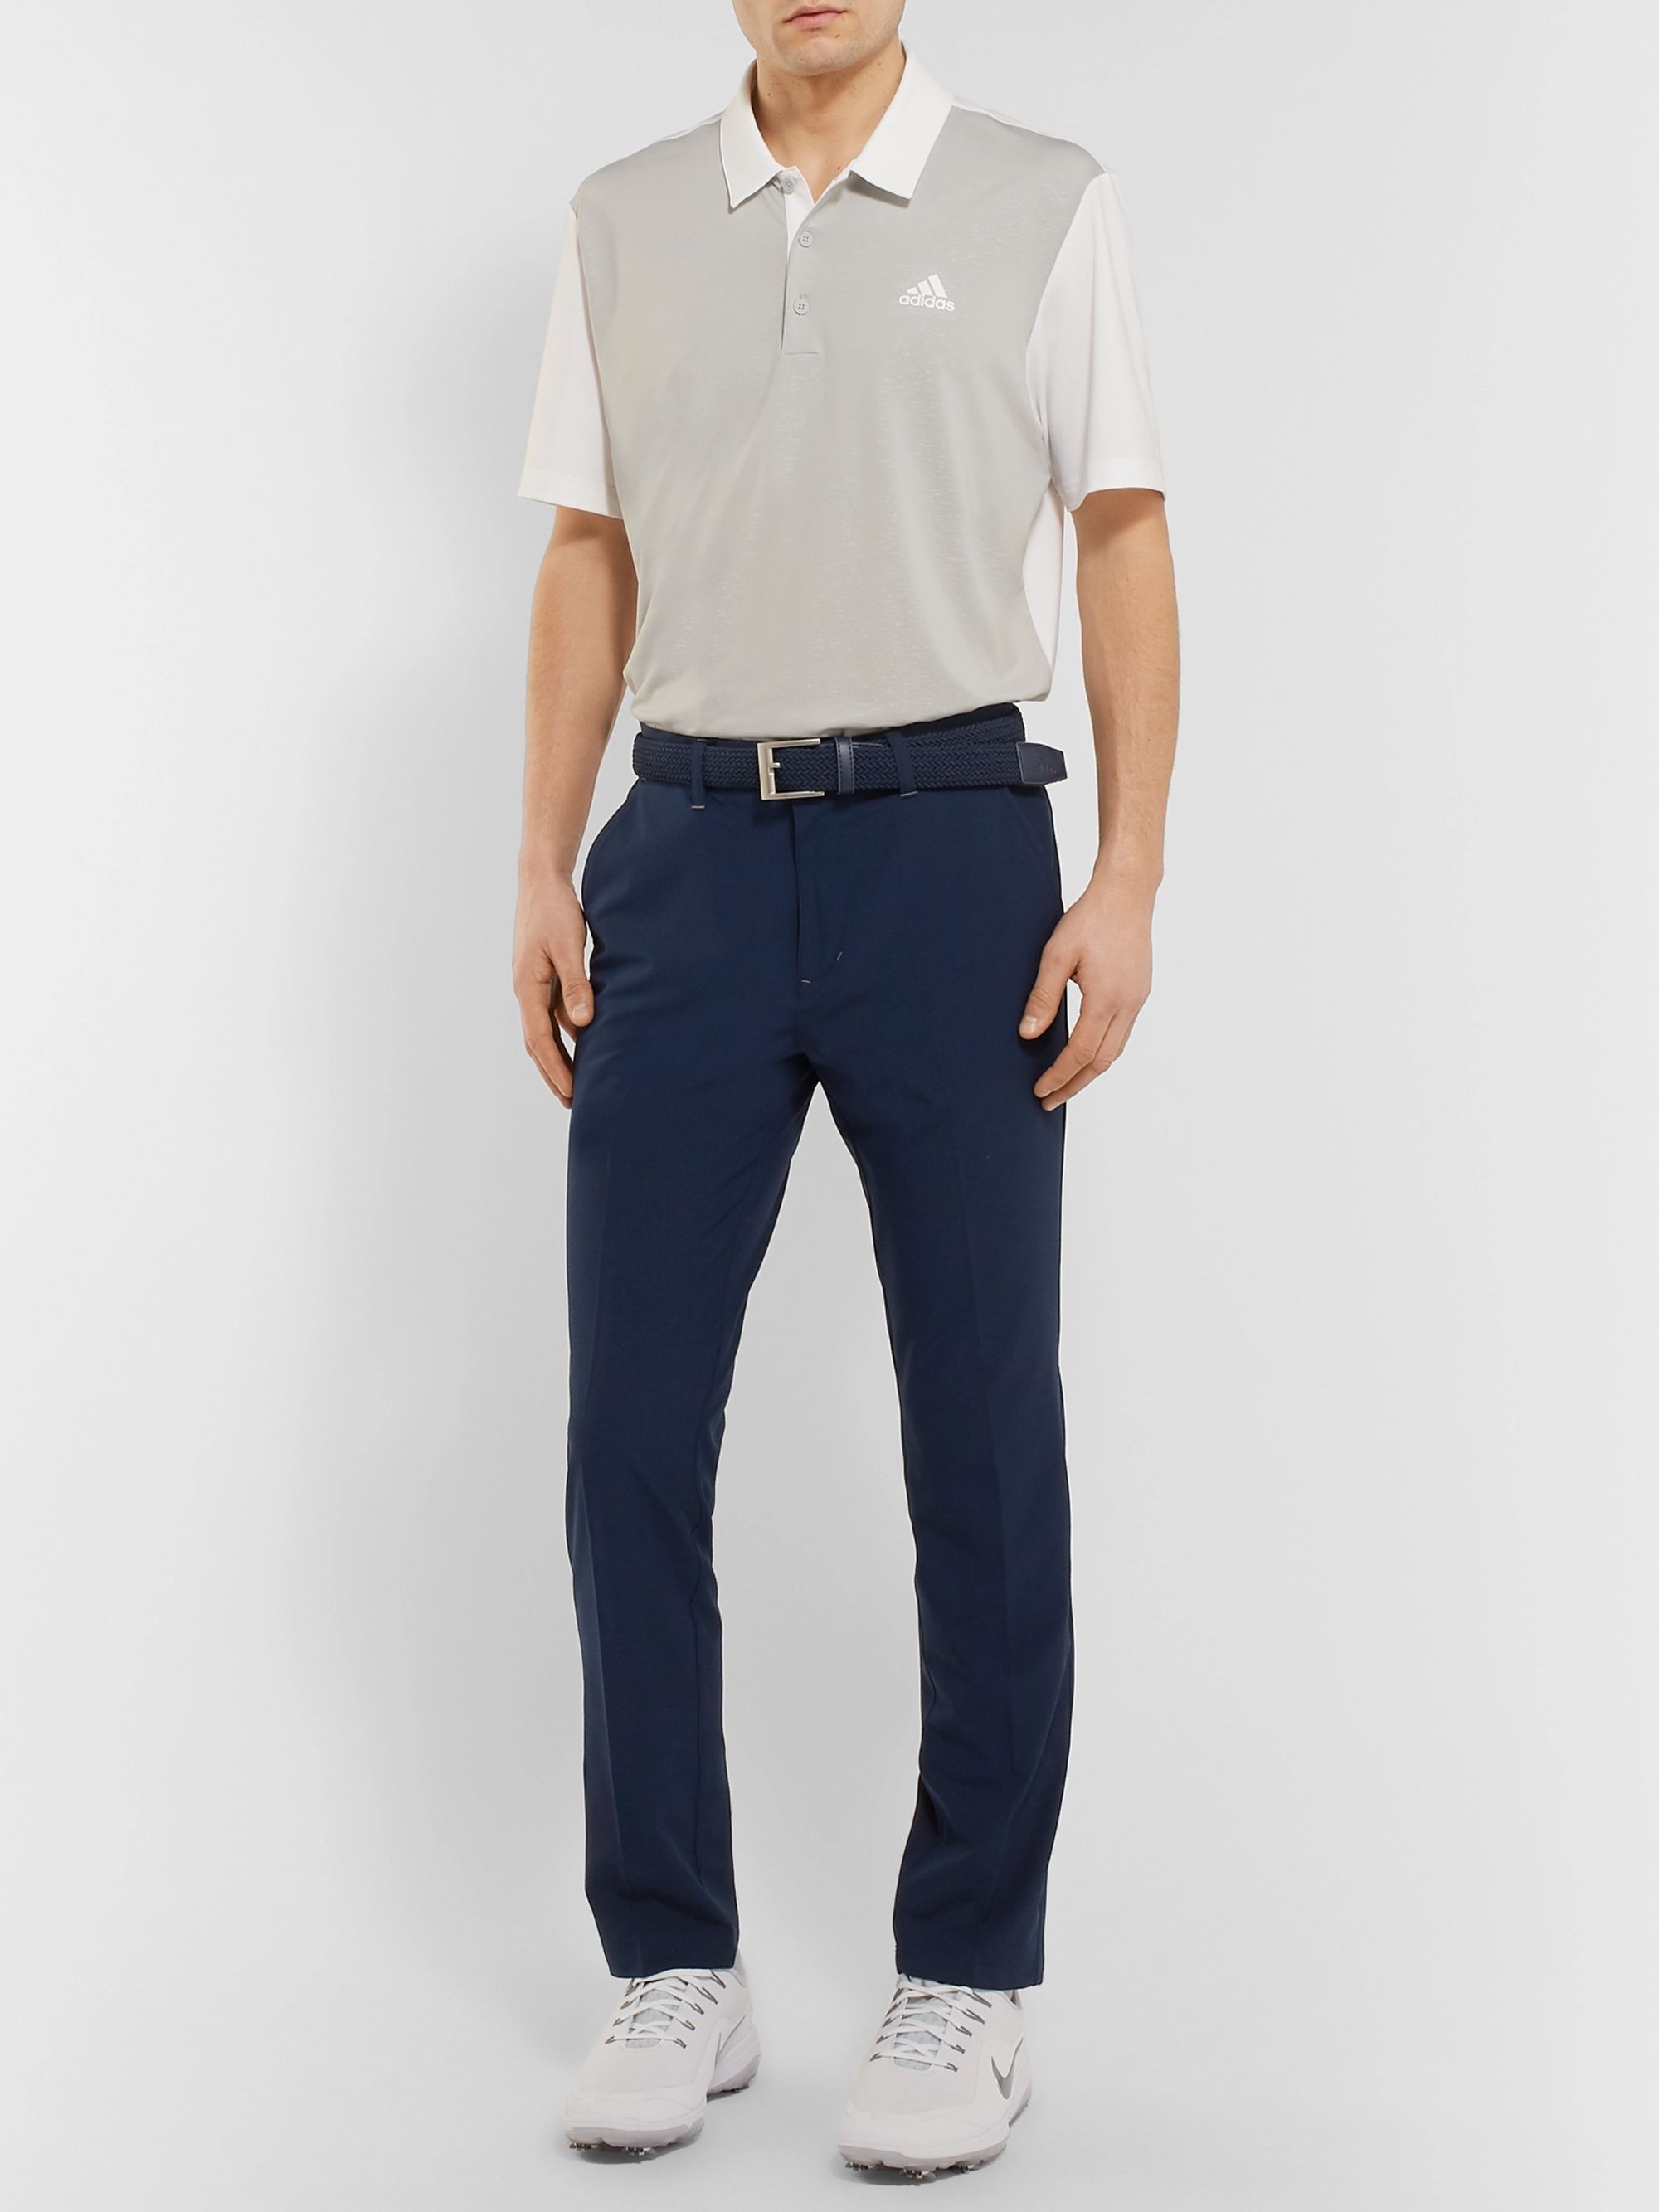 adidas navy golf trousers